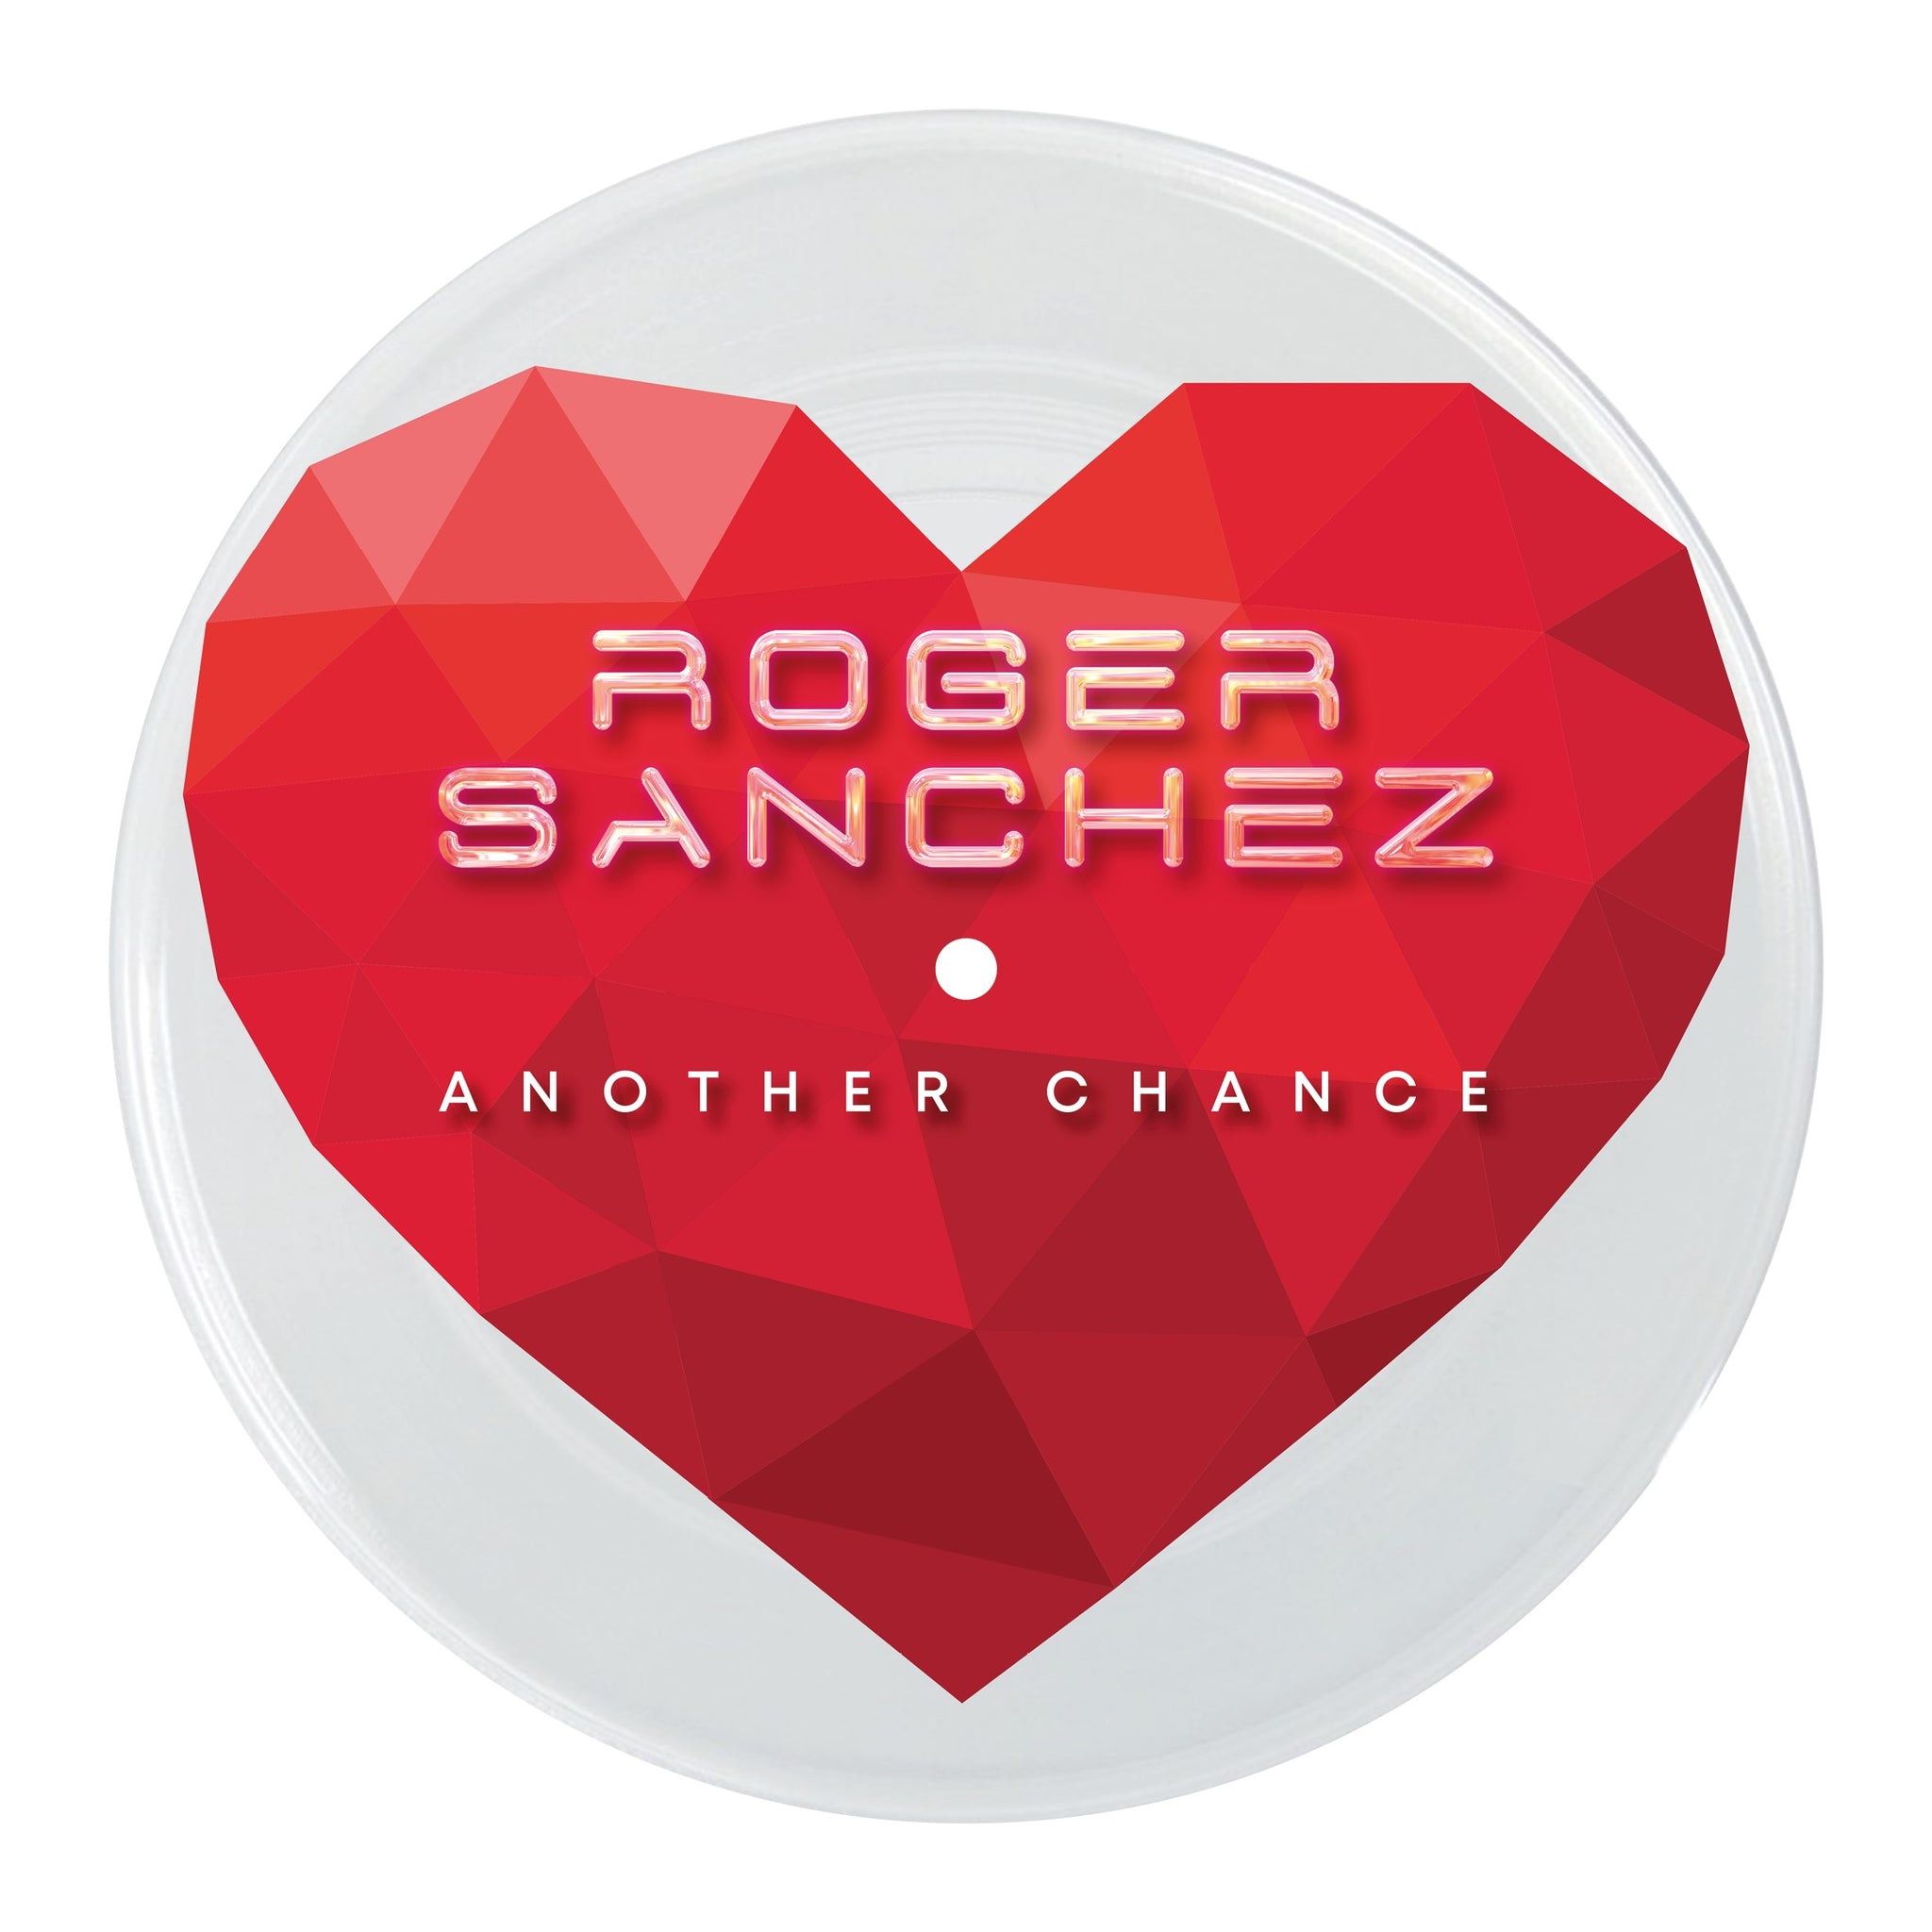 Roger Sanchez - Another Chance (20th Anniversary 7" Picture Disc)